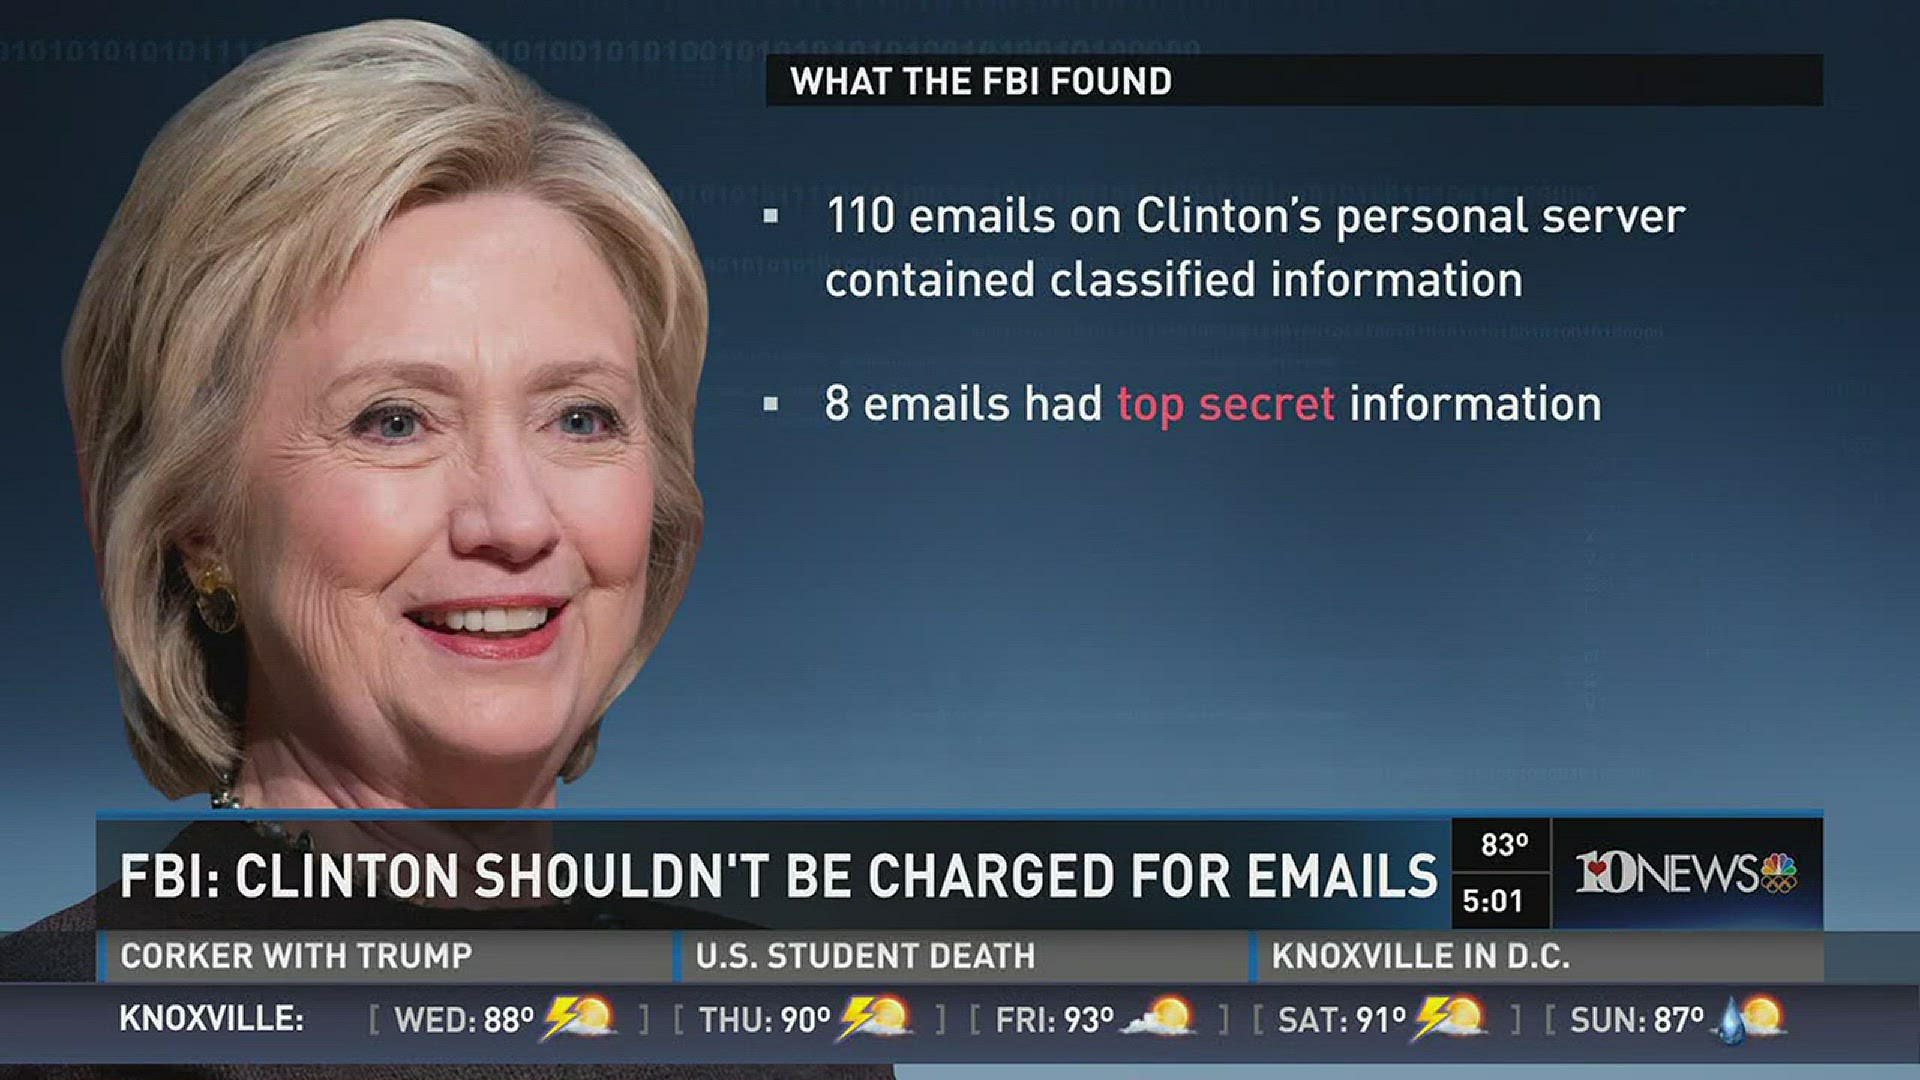 the FBI recommends no criminal charges against Hillary Clinton for her use of a personal email server.